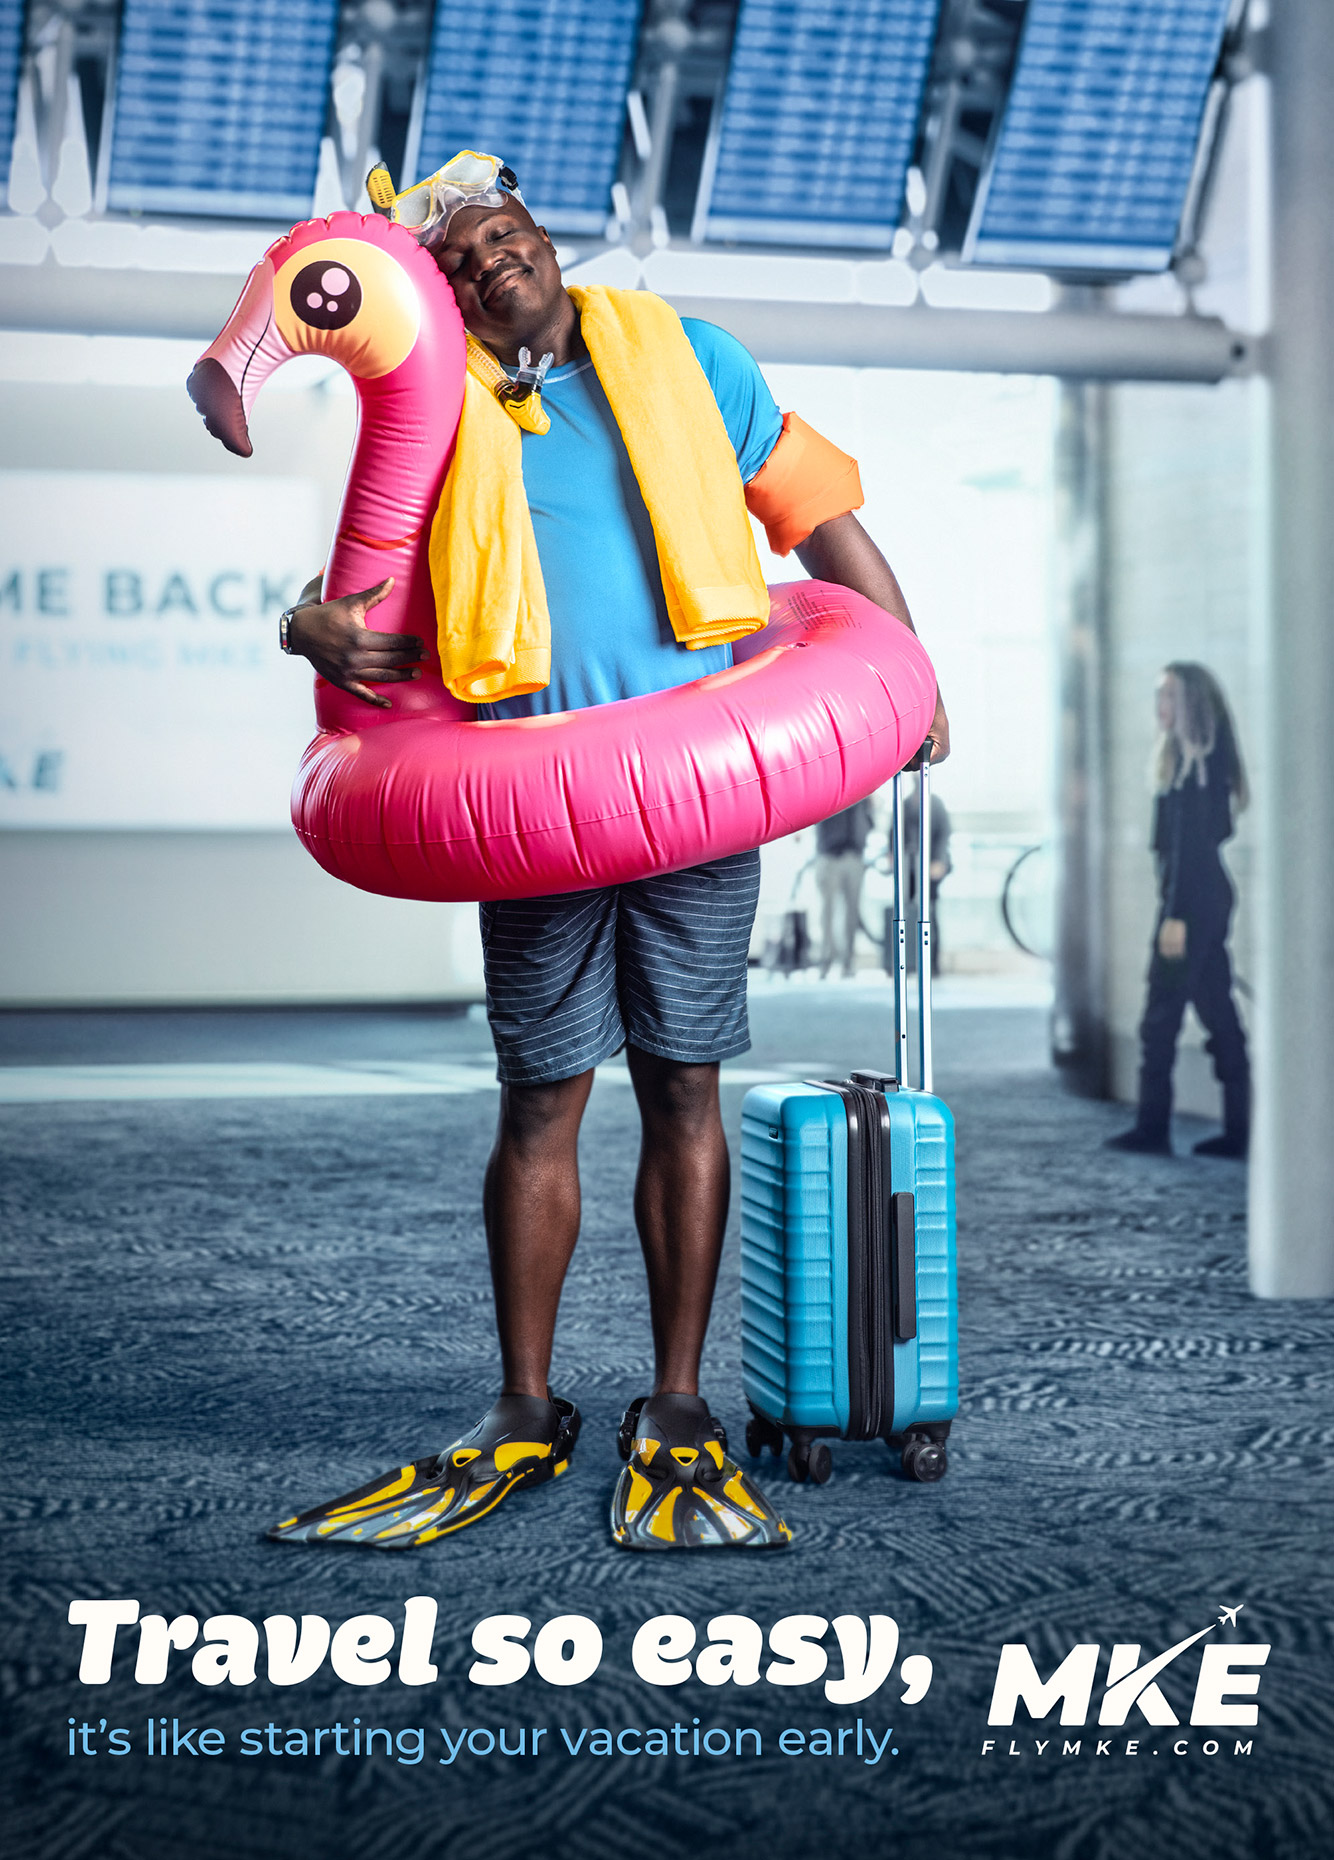 Ad Campaign Airport Snorkel guy